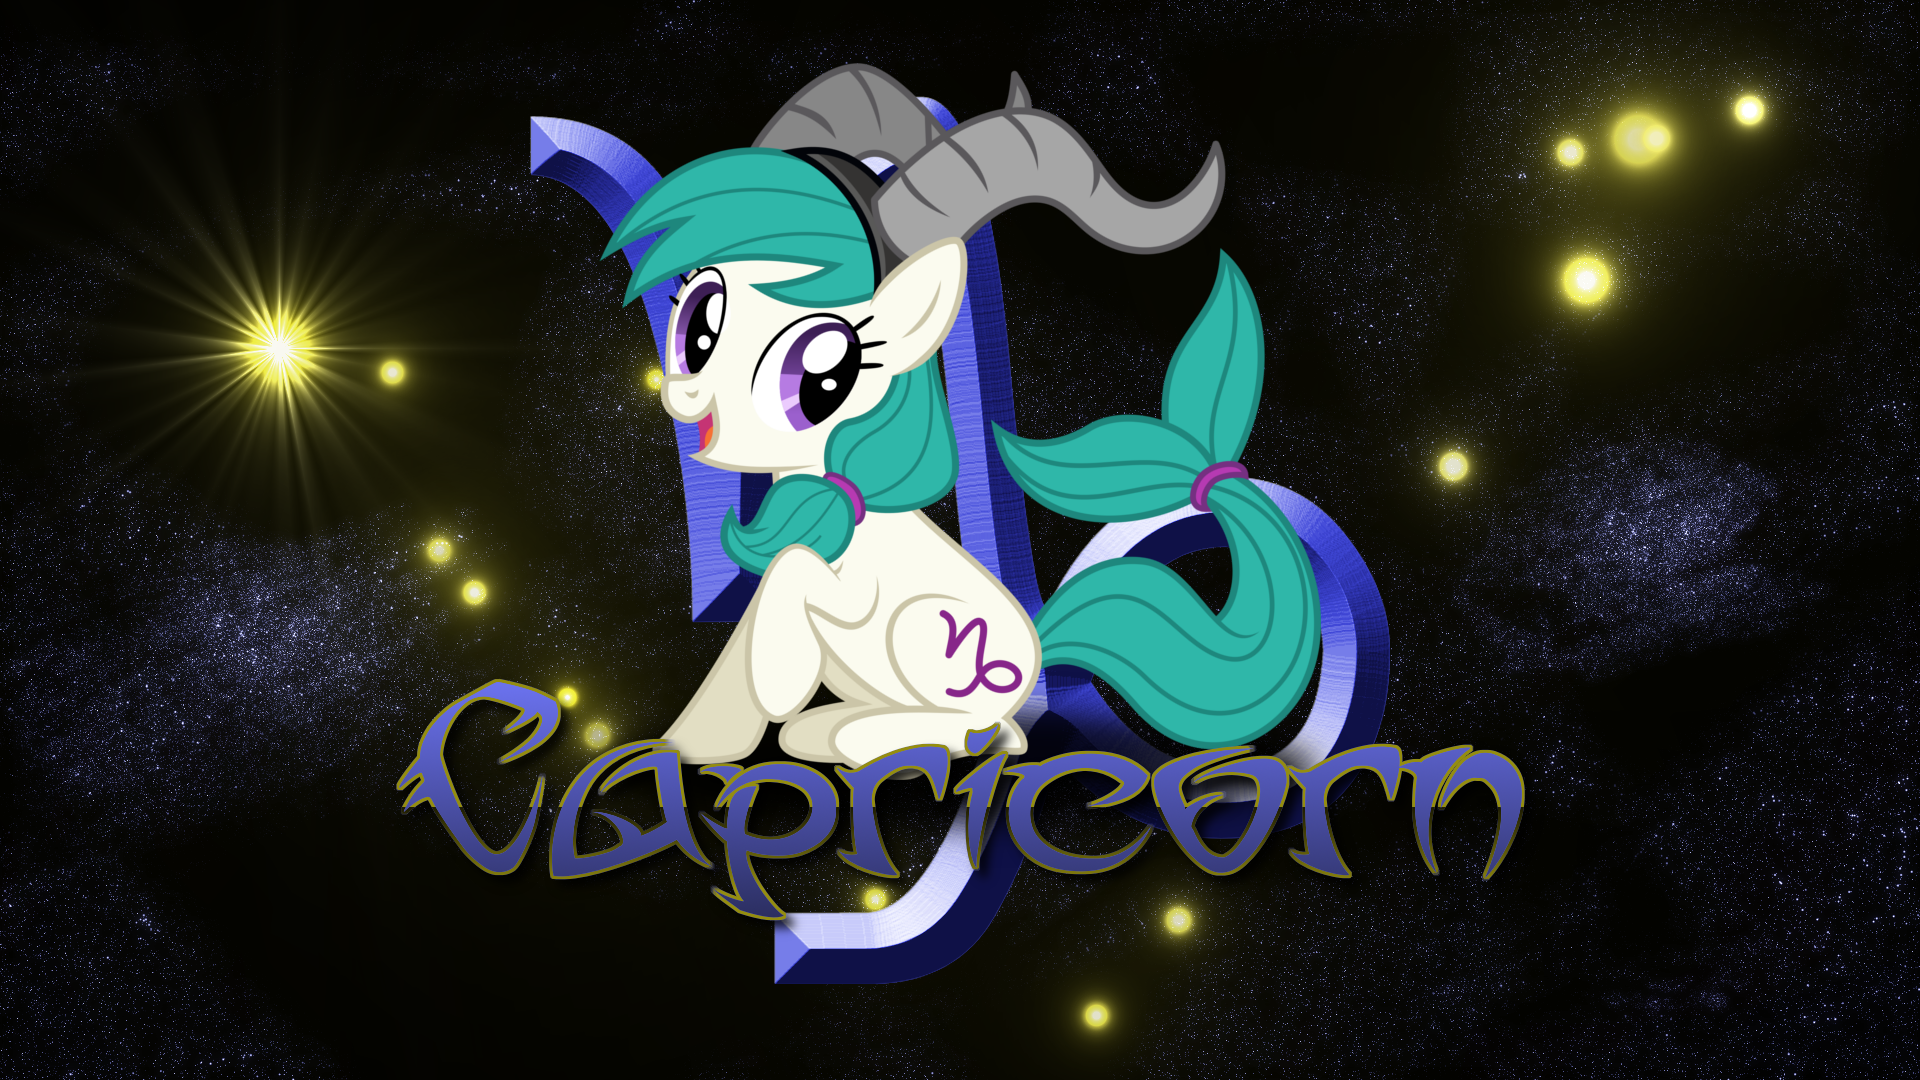 Capricorn Background Wallpaper High Definition Quality